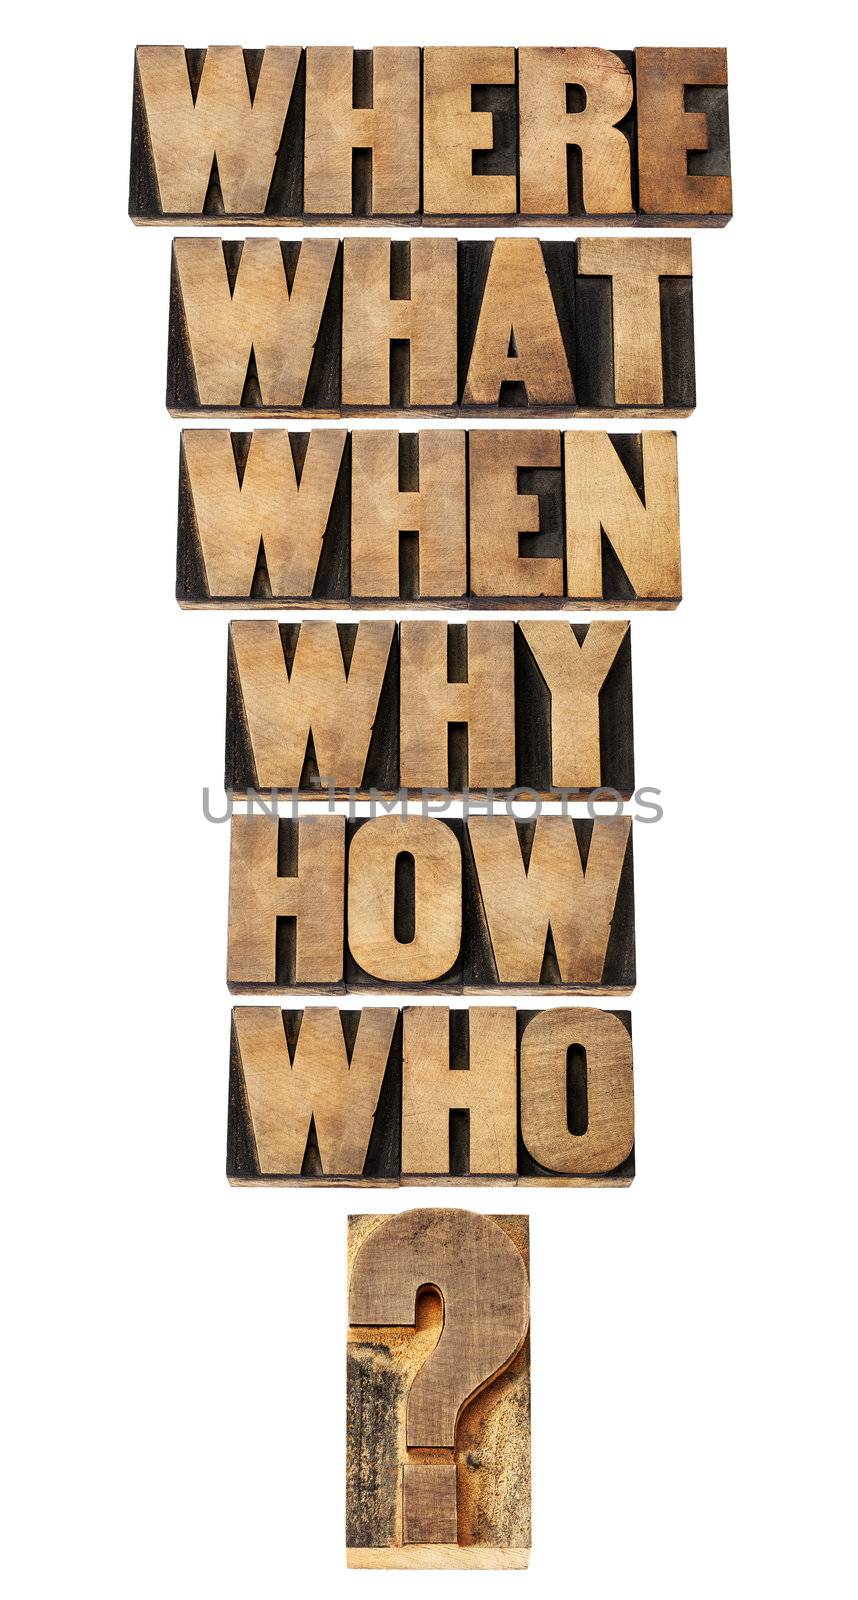 questions collage in wood type by PixelsAway